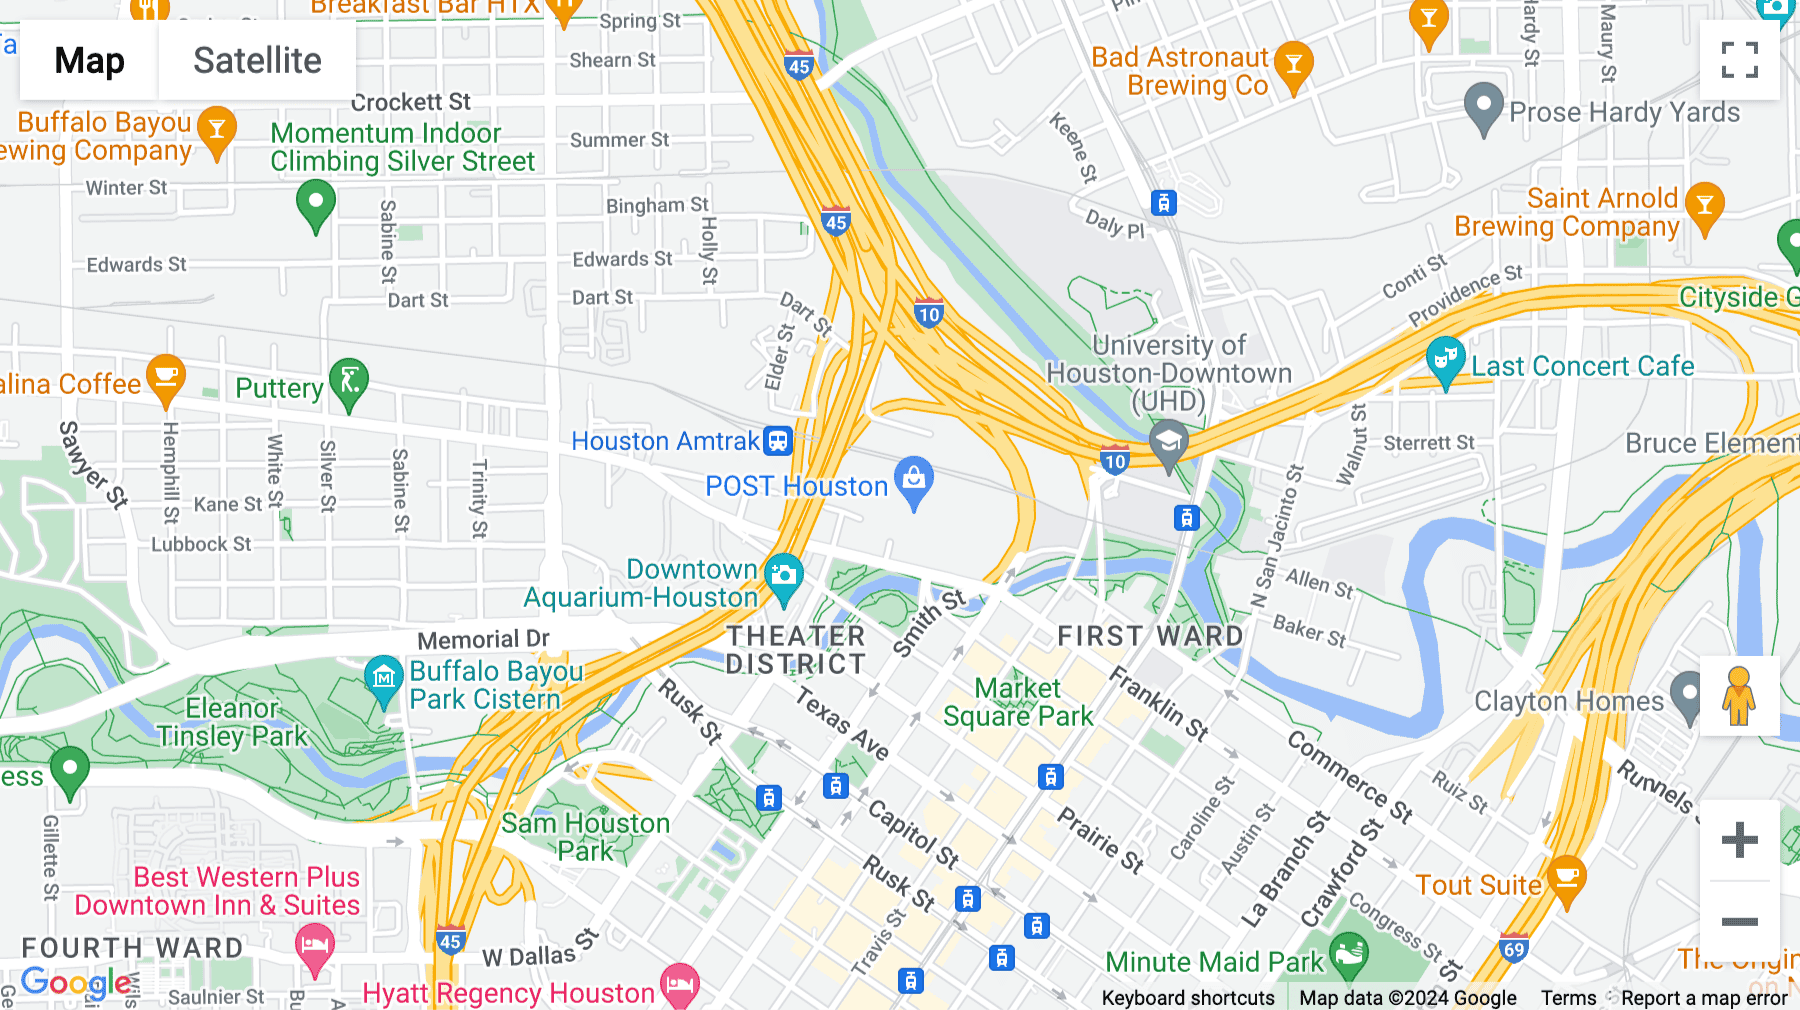 Click for interative map of POST Houston, 401 North Franklin Street, Houston